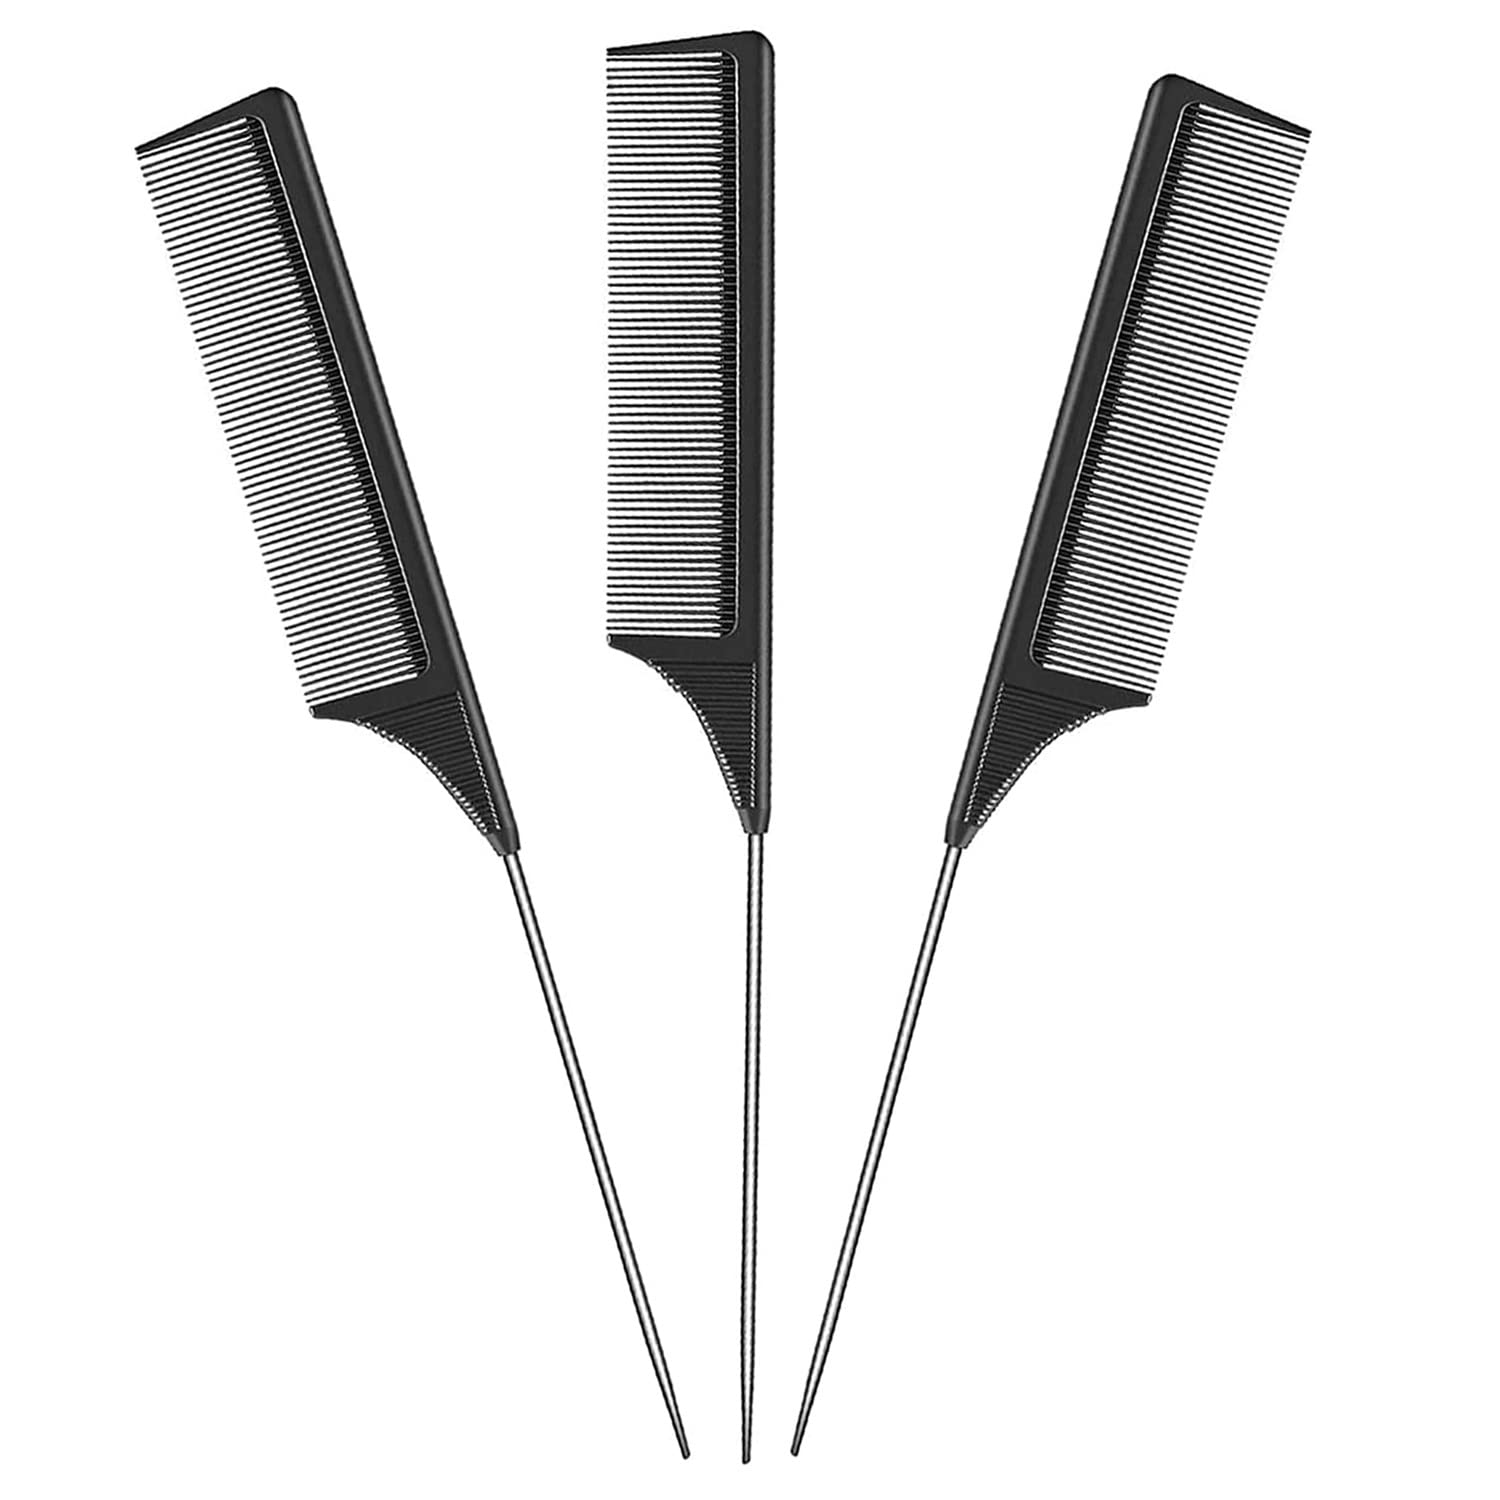 3 Packs Salon Hair Comb,Pintail Comb,Stainless Steel Handle Comb, Anti-static Tail Comb Sectioning Comb,Heat Resistant Carbon Lift Teasing Combs for Home